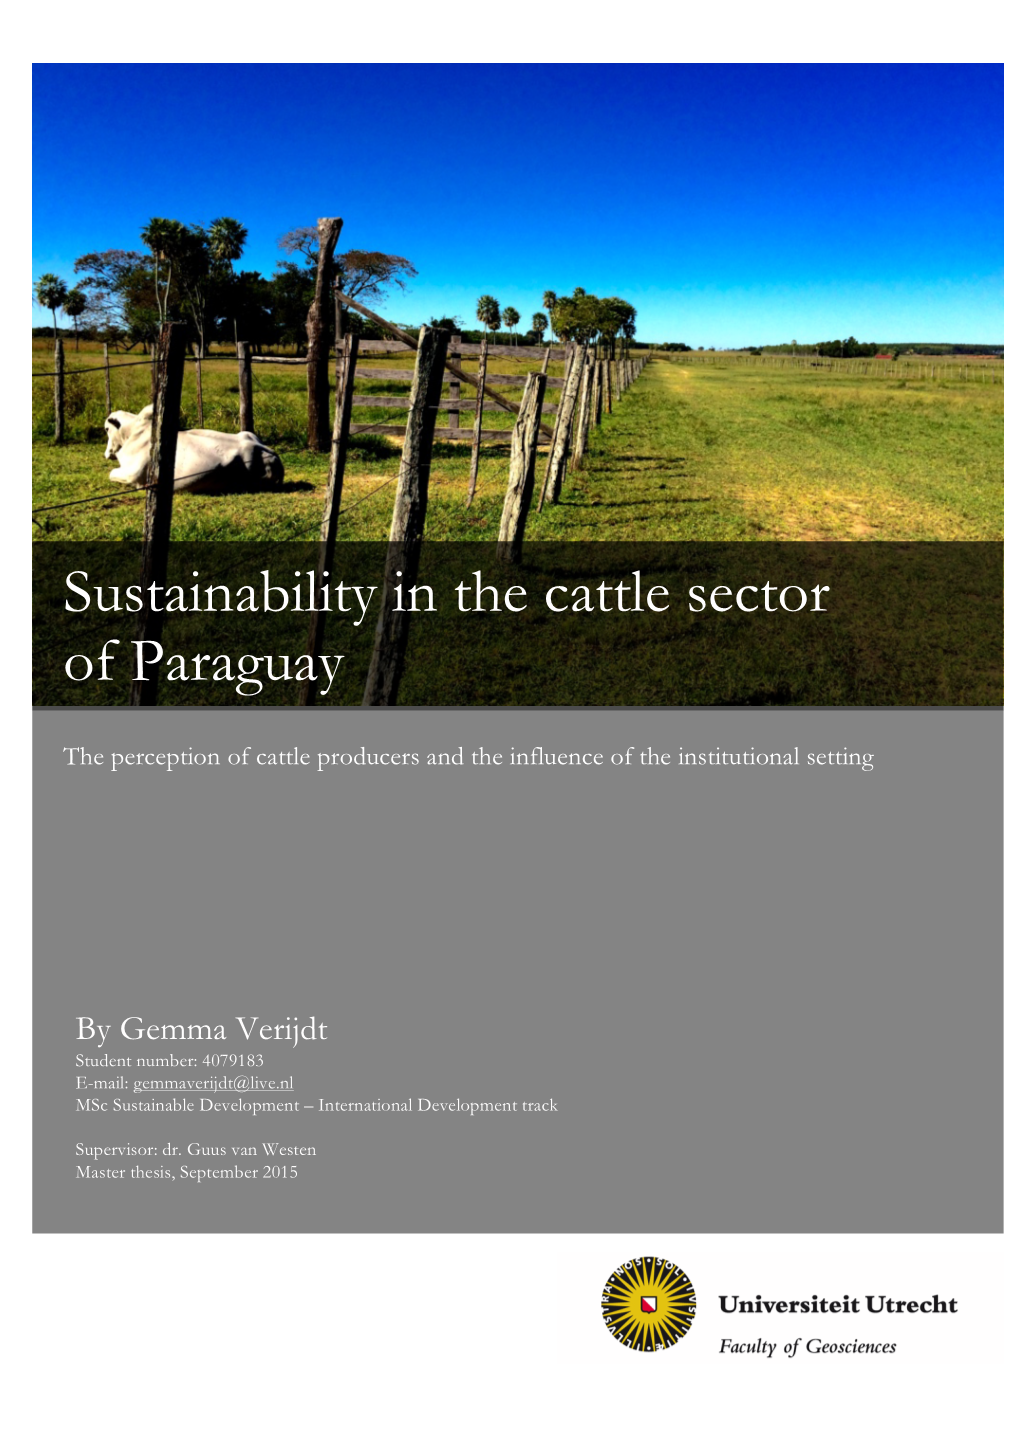 Sustainability in the Cattle Sector of Paraguay